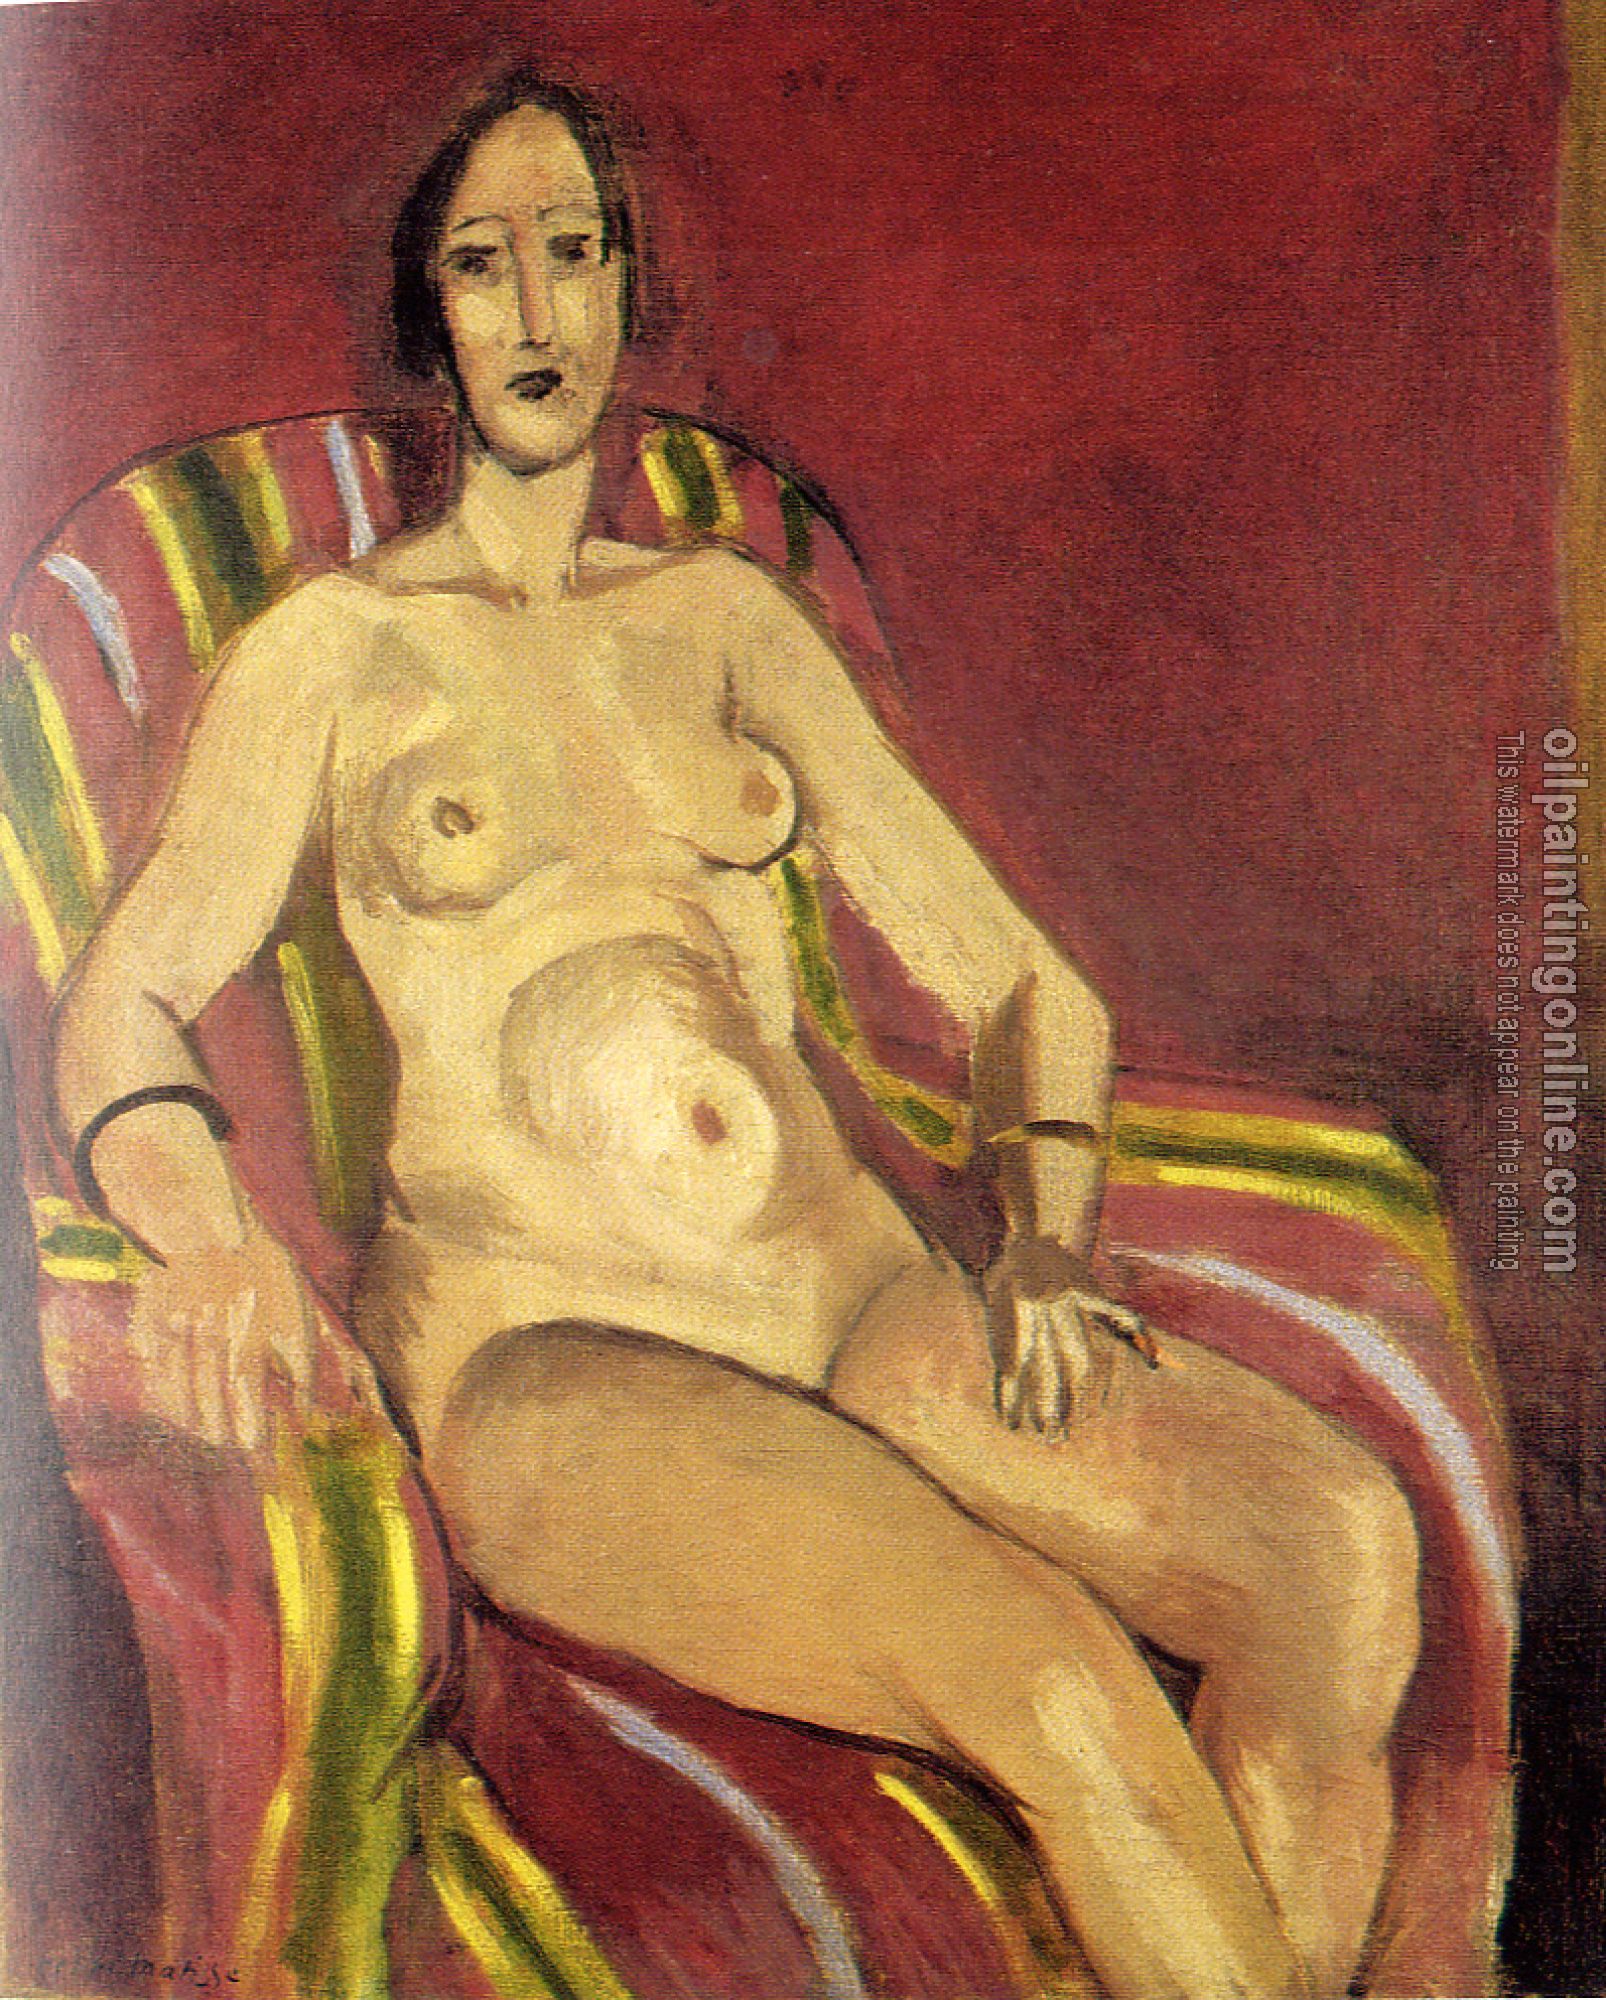 Matisse, Henri Emile Benoit - seated nude on a red background